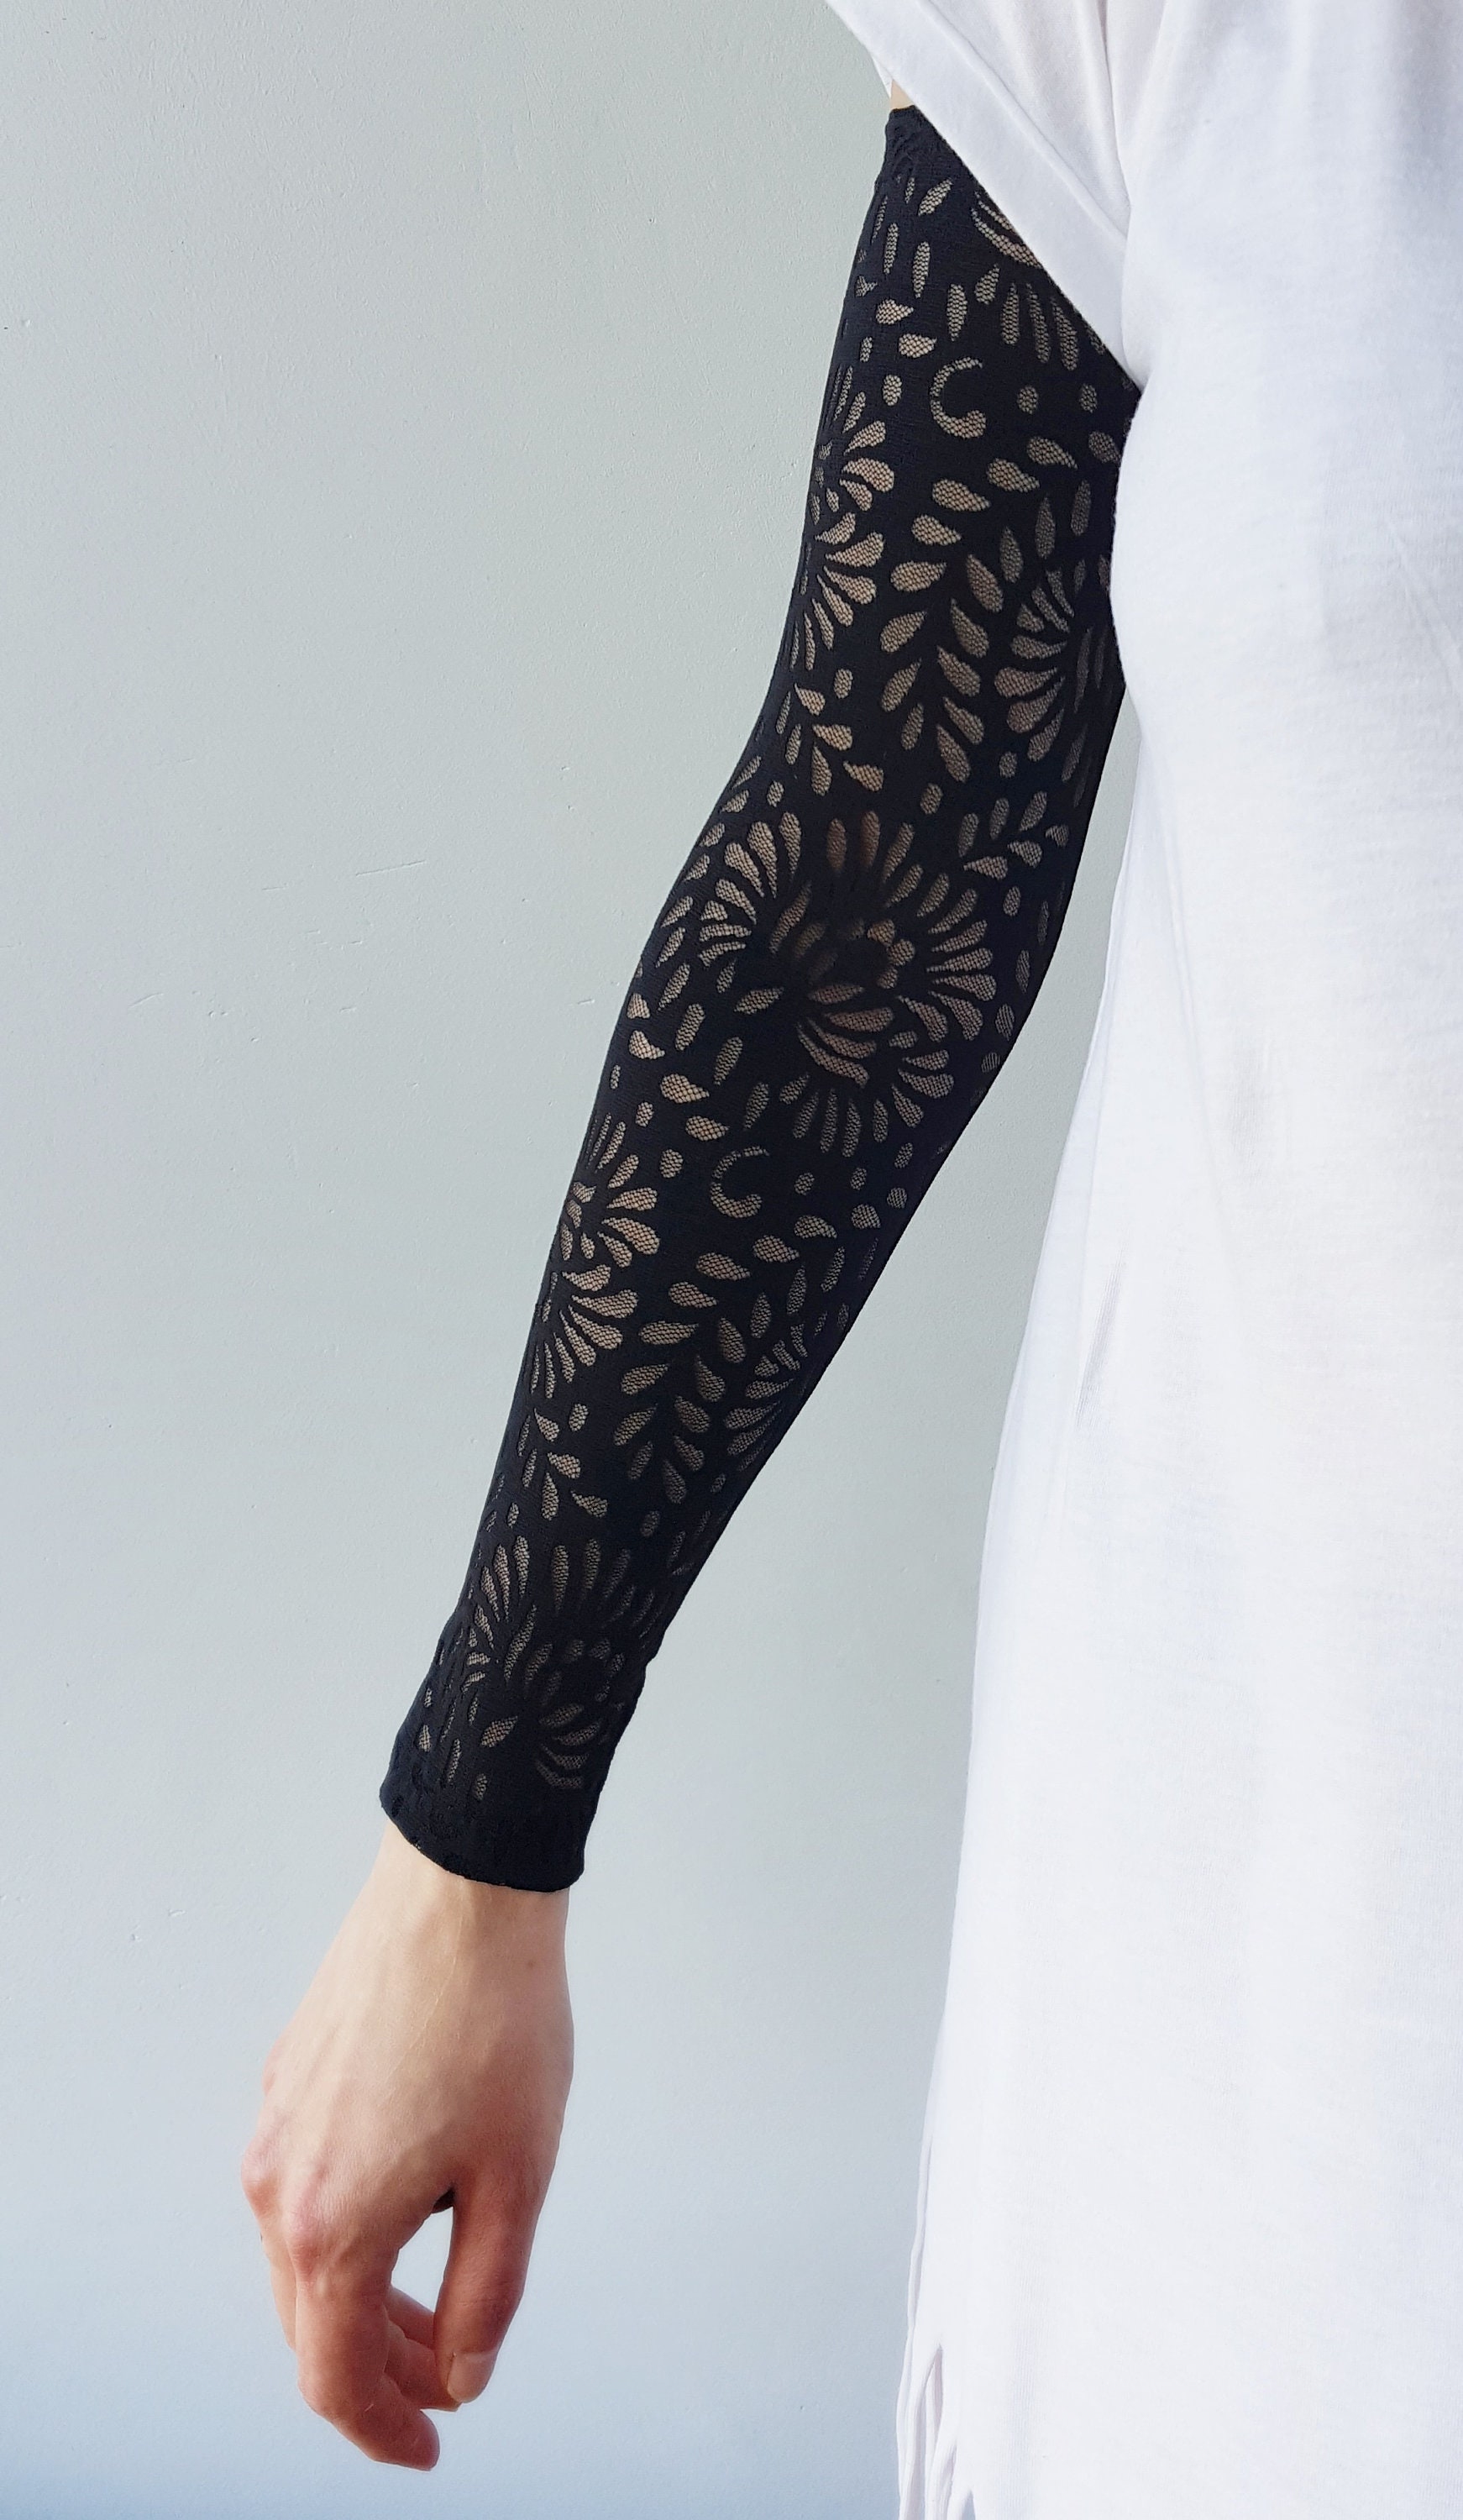 Black Long Arm Sleeves Pair Sun Protection, Protect Your Arm, Long